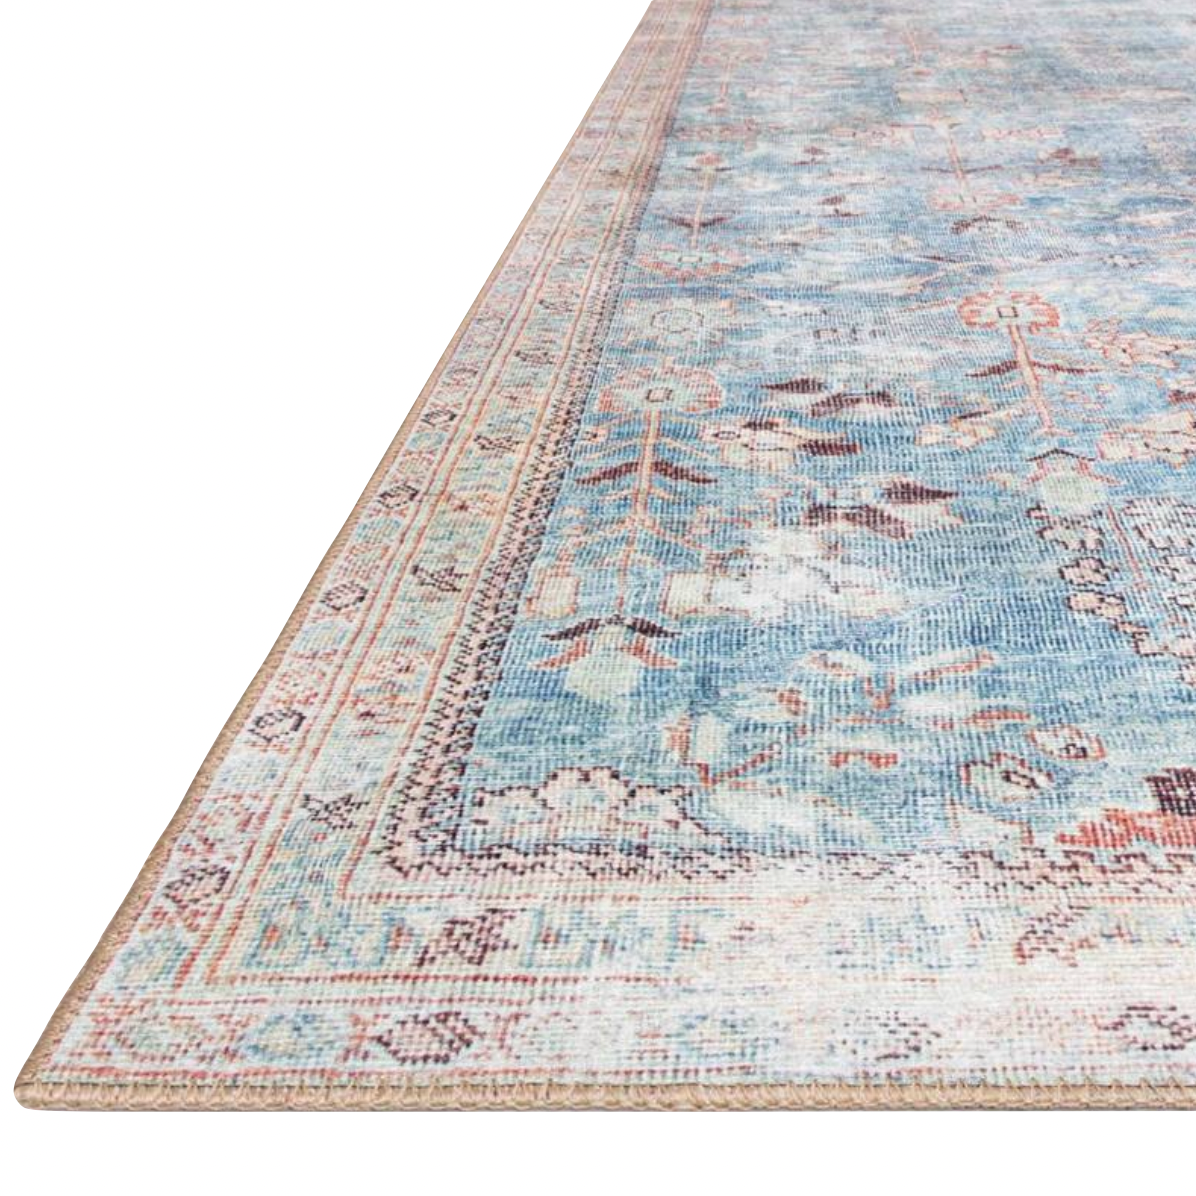 Old soul, new spirit. Power-loomed of 100% polyester, the Wynter Teal / Multi area rug showcases a one-of-a-kind vintage or antique area rug look at an affordable price. This rug brings in tones of blue, ivory, and pink and ideal for high traffic areas due to the rug's durability. The rug is perfect for living rooms, dining rooms, kitchens, hallways, and entryways.  Power Loomed 100% Polyester WYN-06 Teal/Multi Colors: Blue, Ivory, Pink